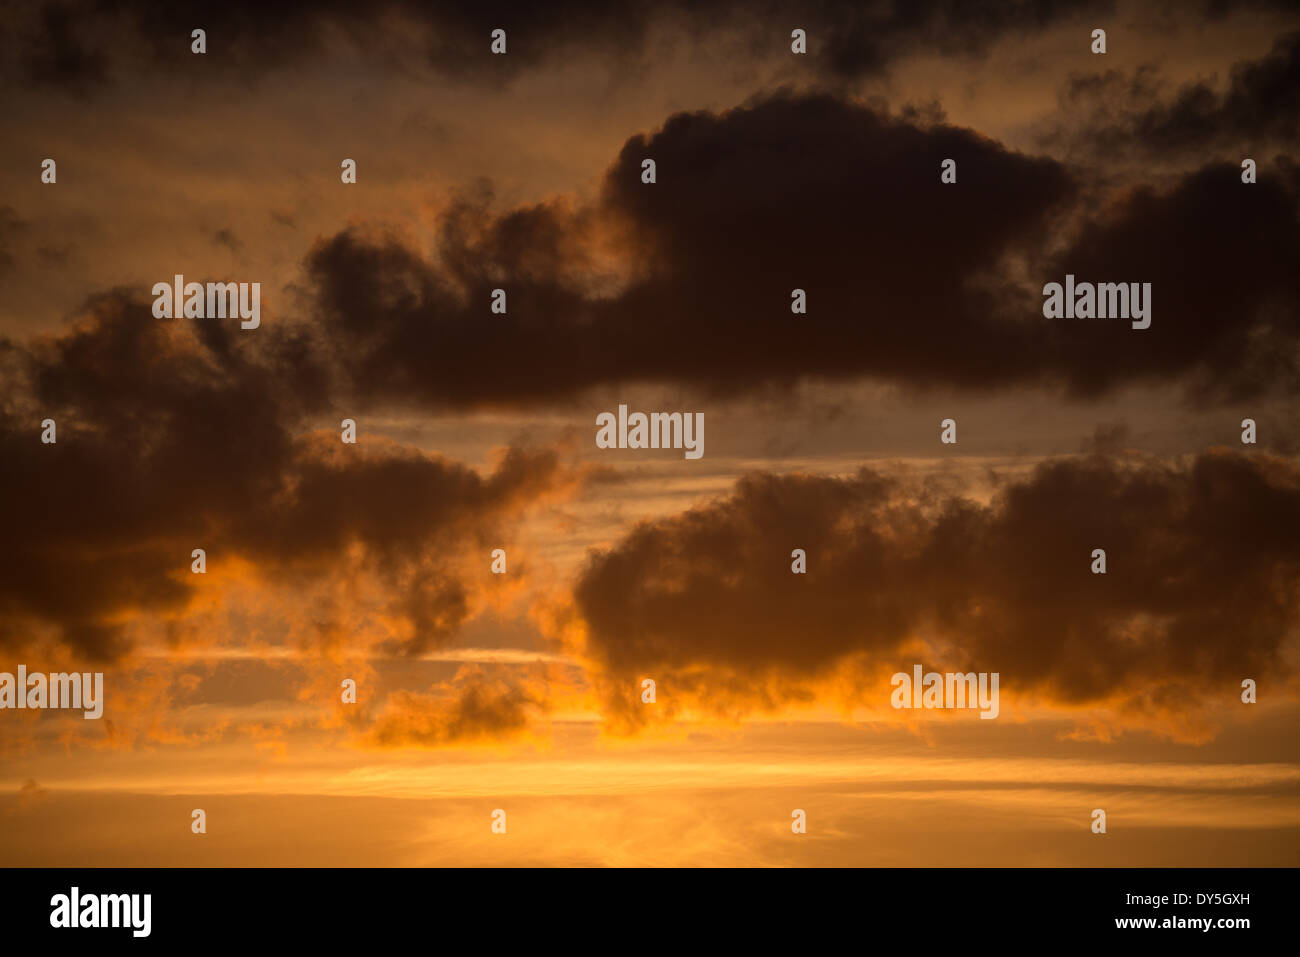 Light clouds are silhouette against a golden sky at sunset. Stock Photo